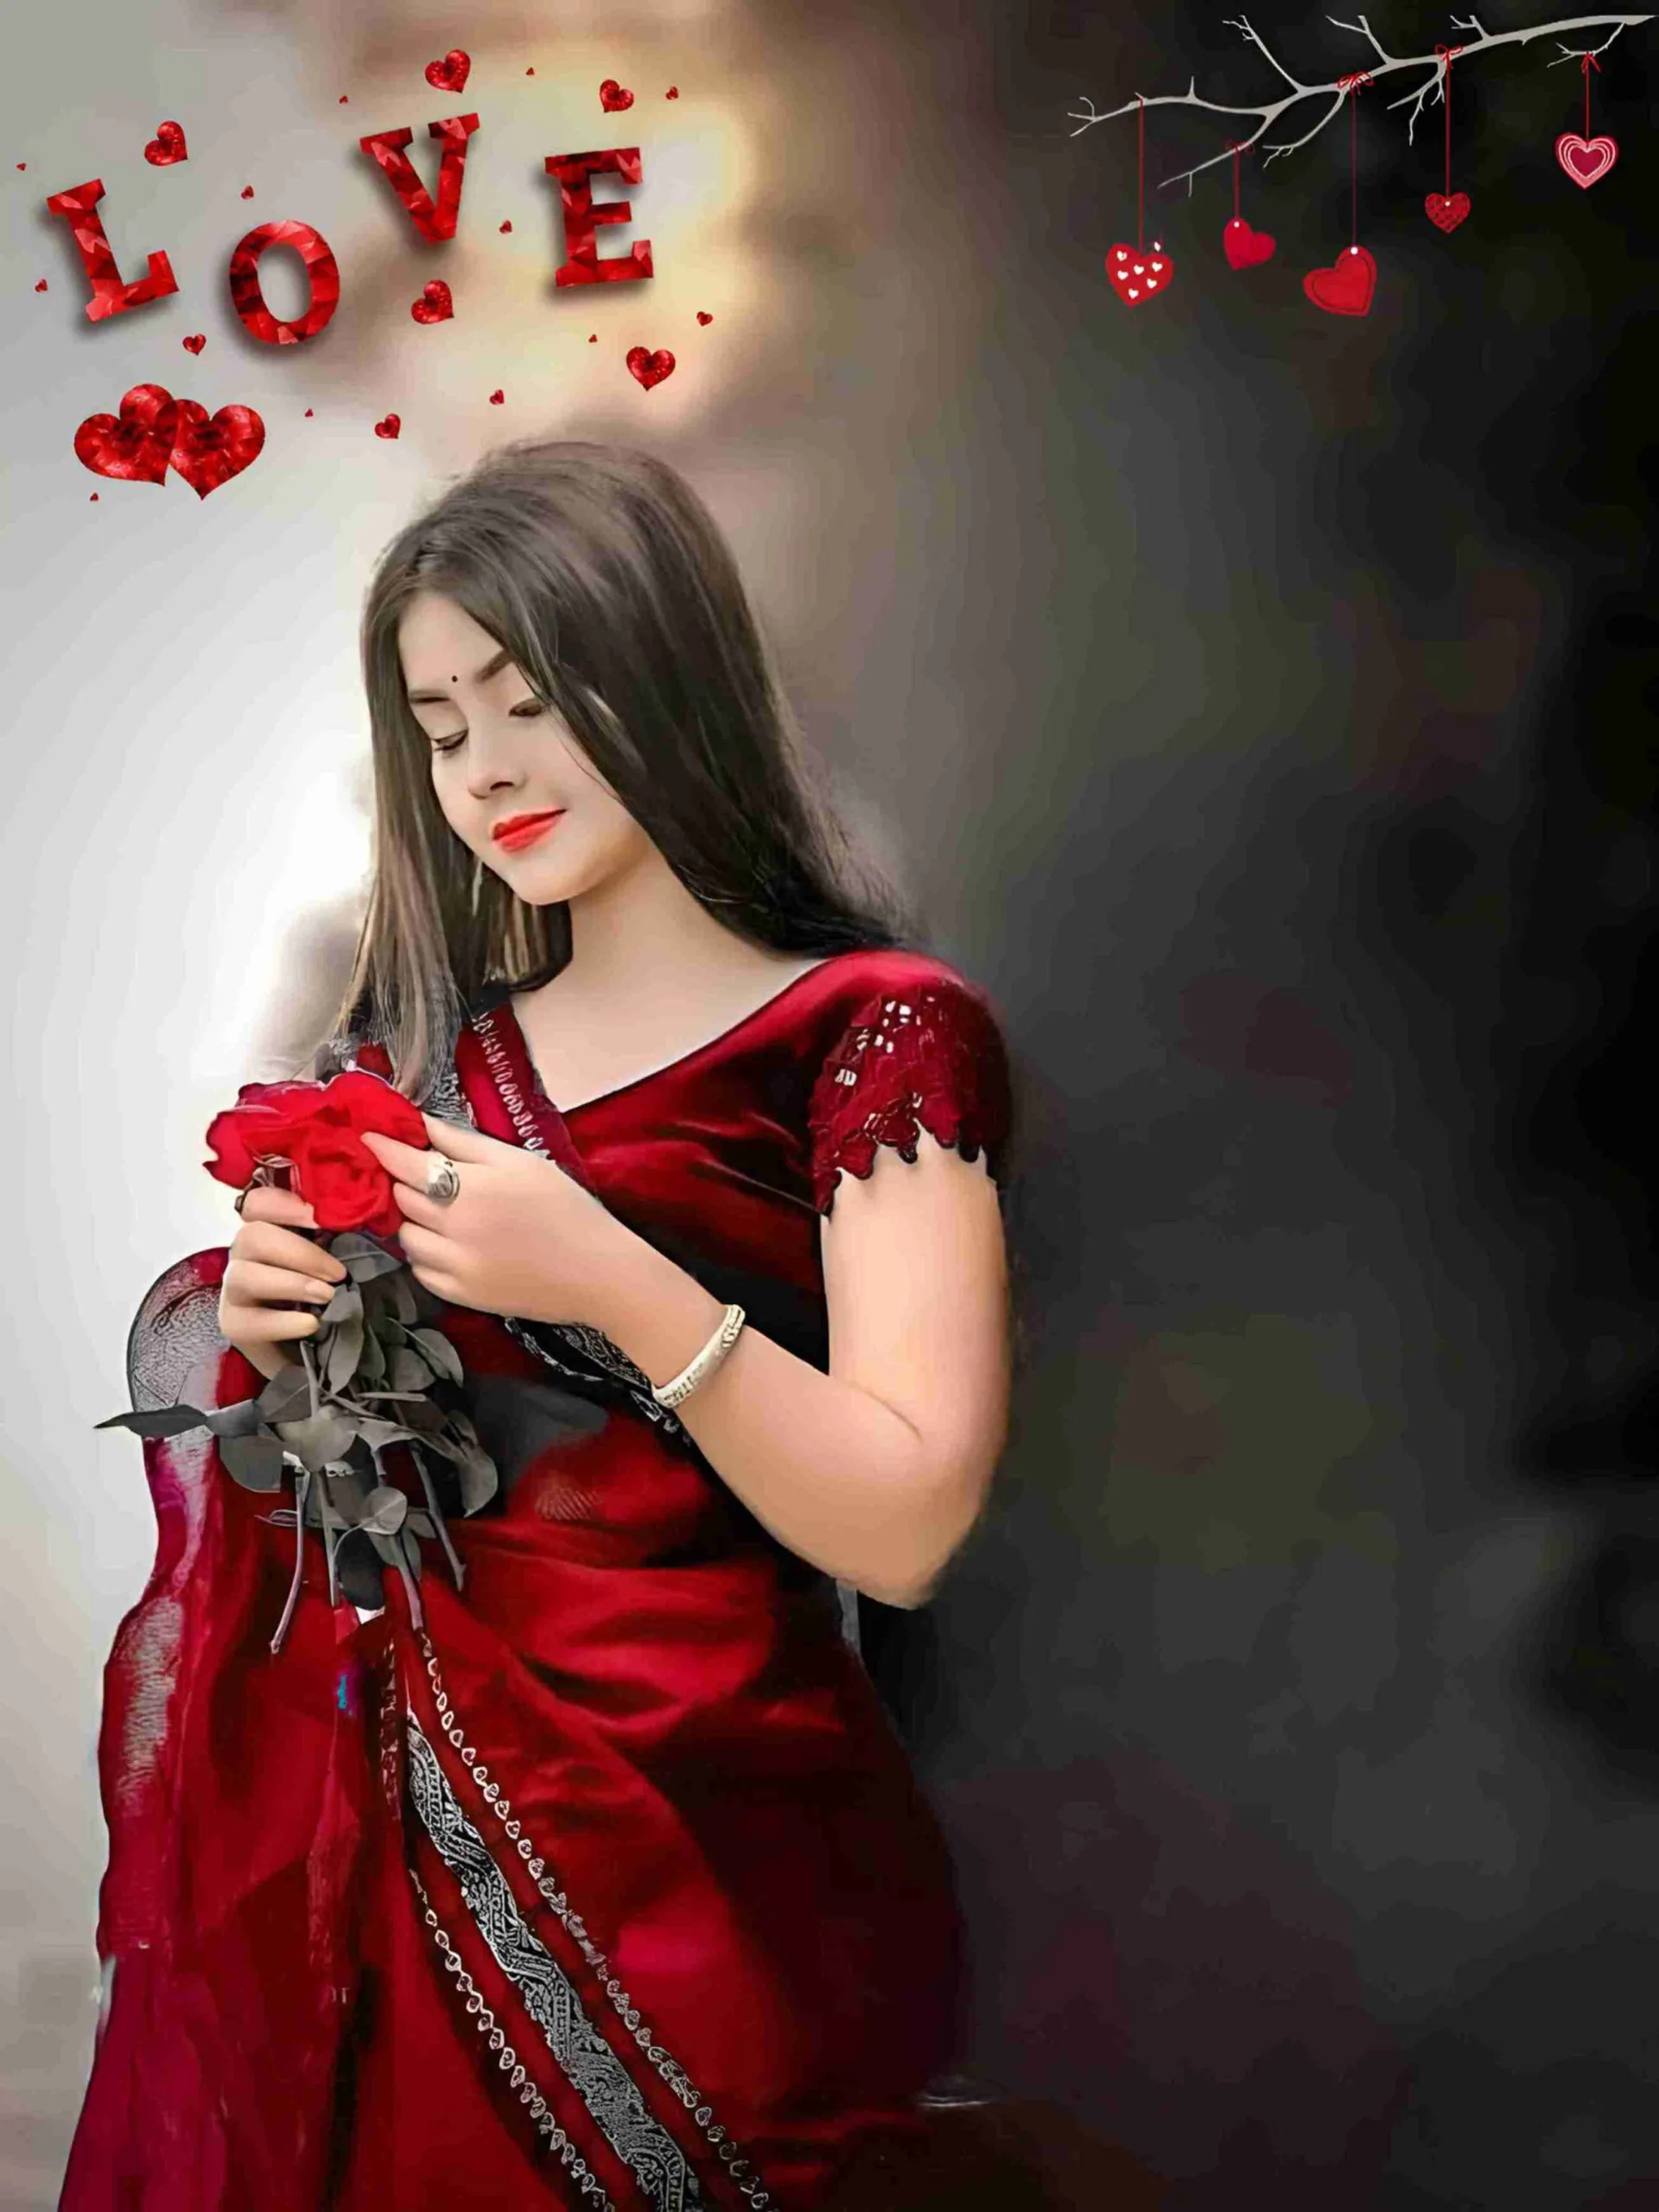 Rose Day Cb Background Download